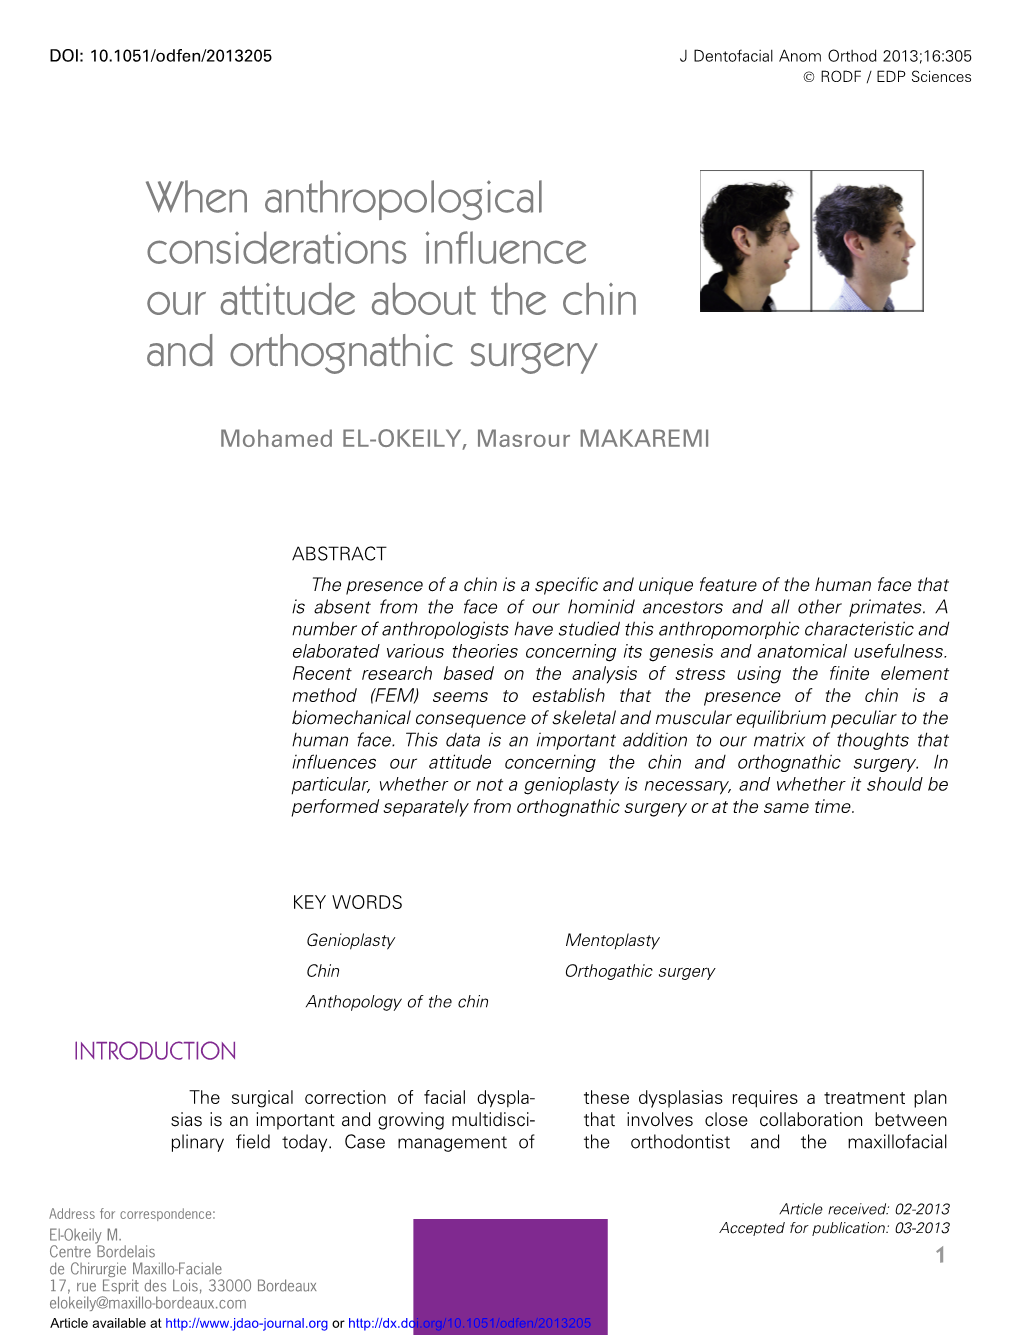 When Anthropological Considerations Influence Our Attitude About the Chin and Orthognathic Surgery